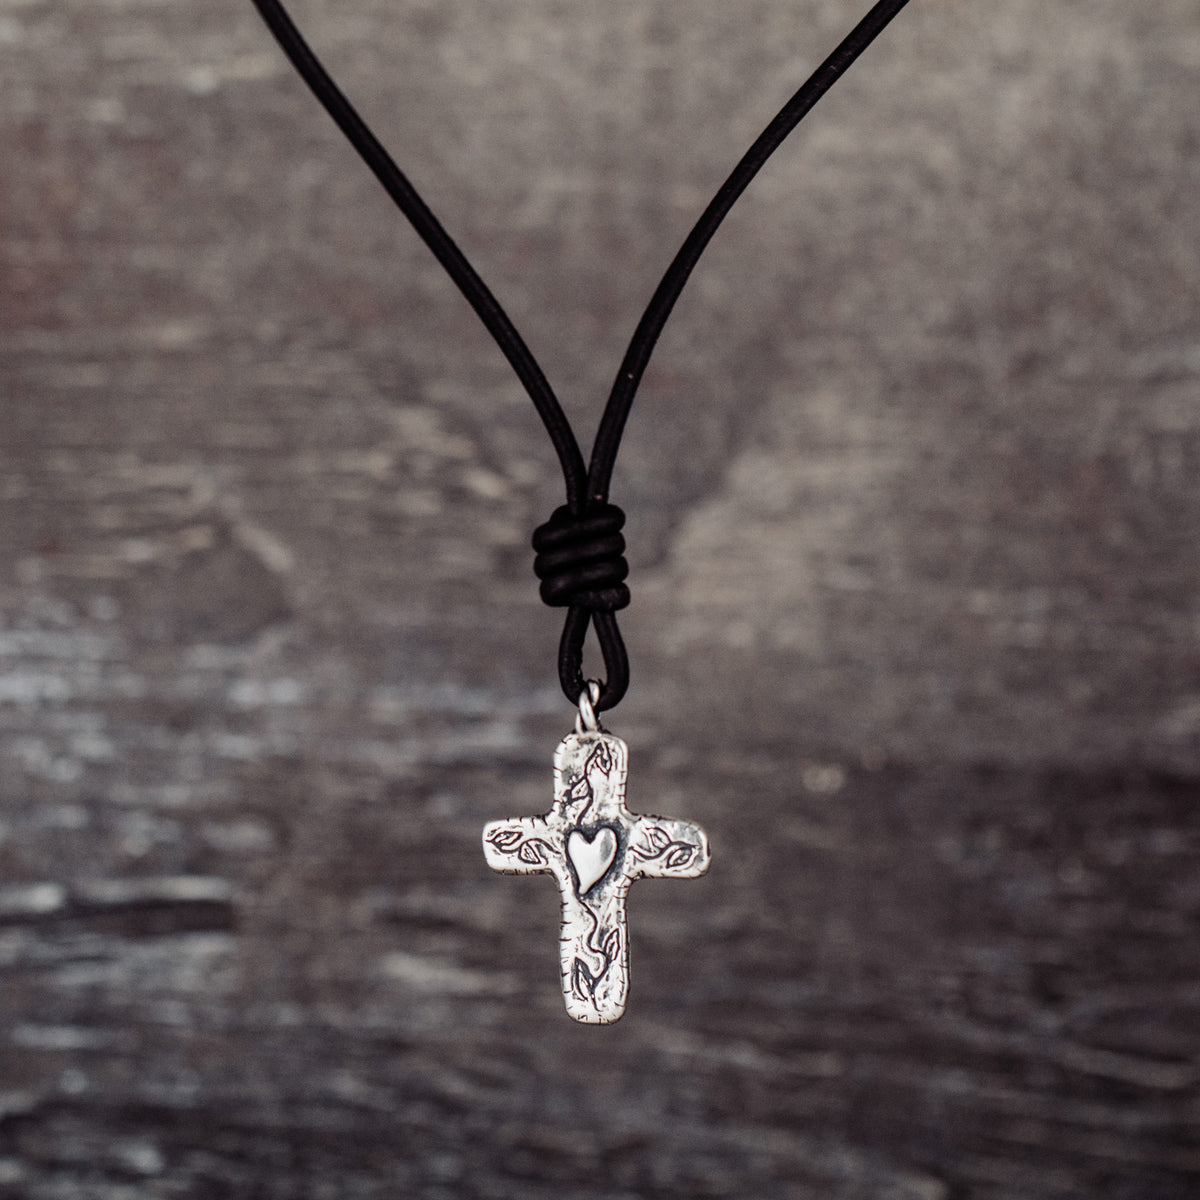 leather necklace with cross pendant